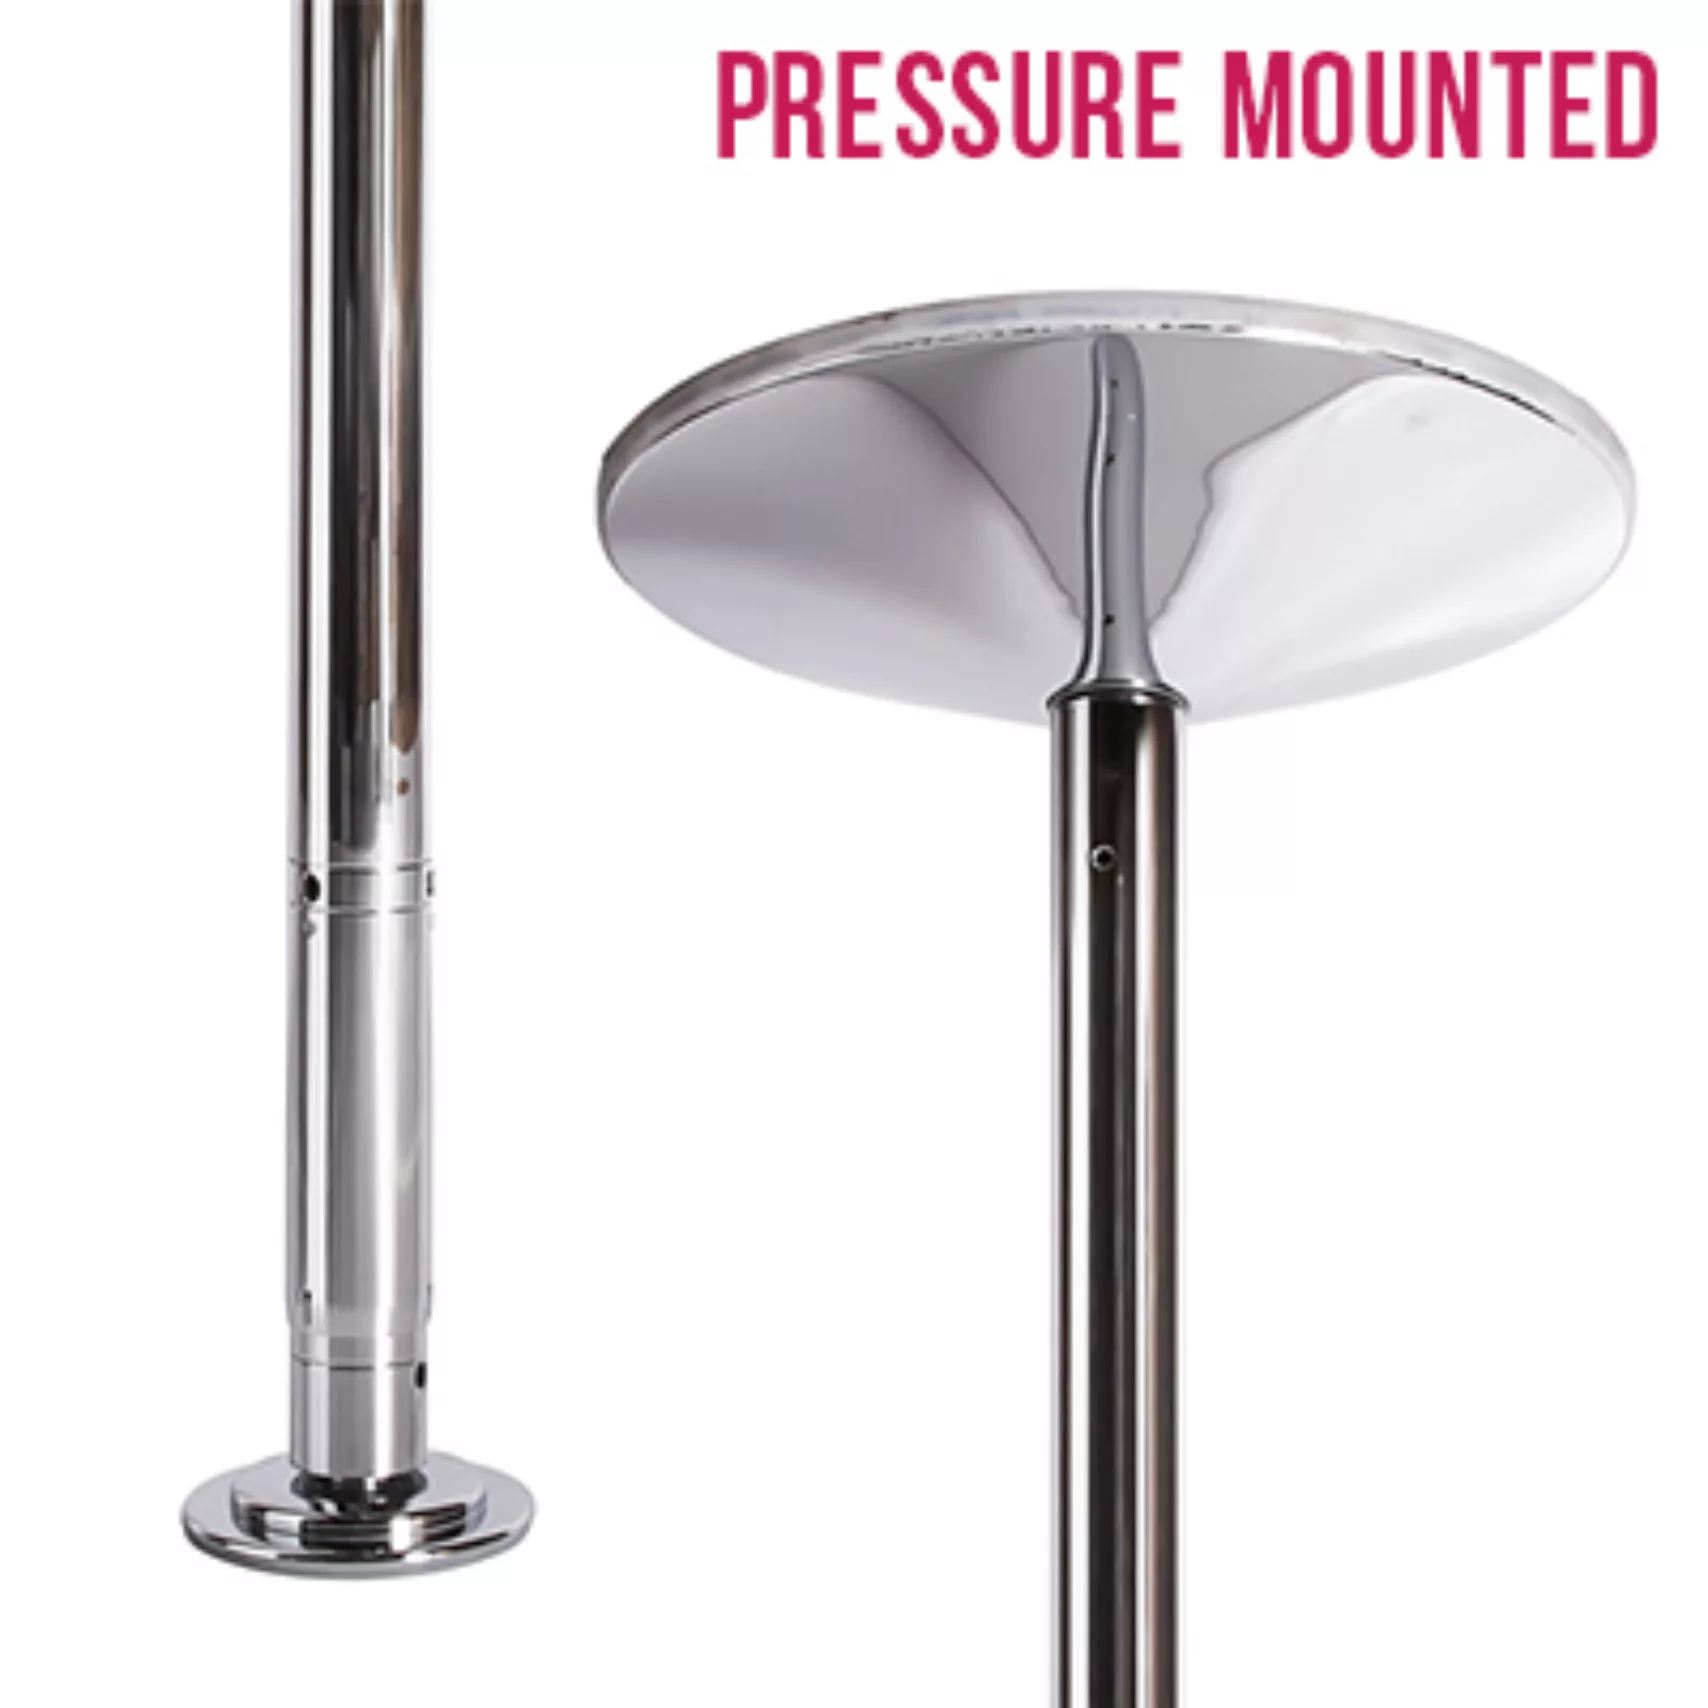 Pressure Mounted